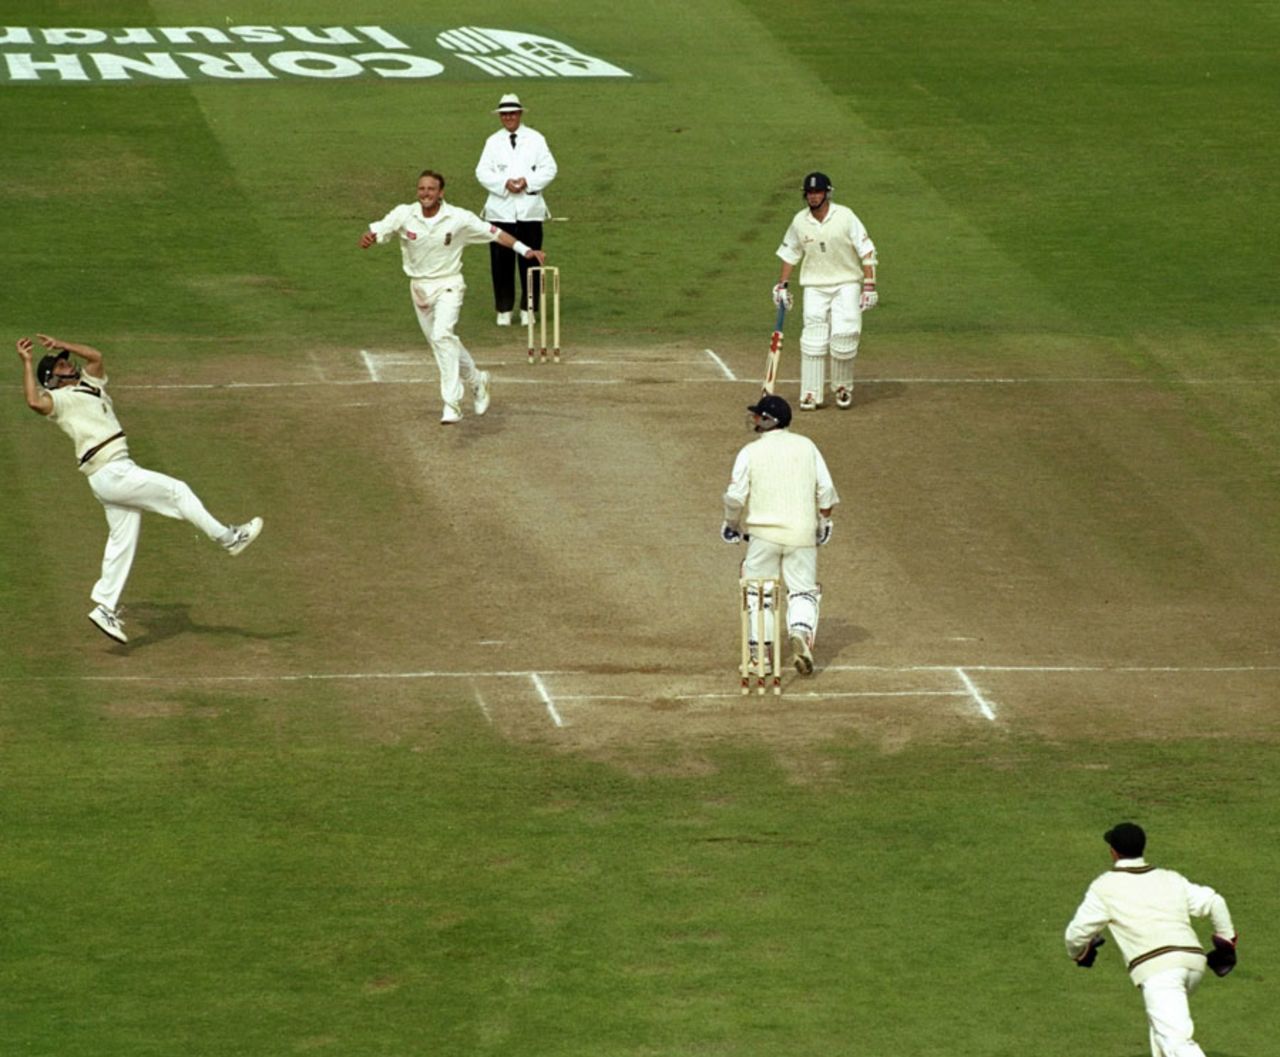 Allan Donald celebrates after Gary Kirsten takes a catch to dismiss Darren Gough, England v South Africa, 3rd Test, Old Trafford, 5th day, July 6, 1999